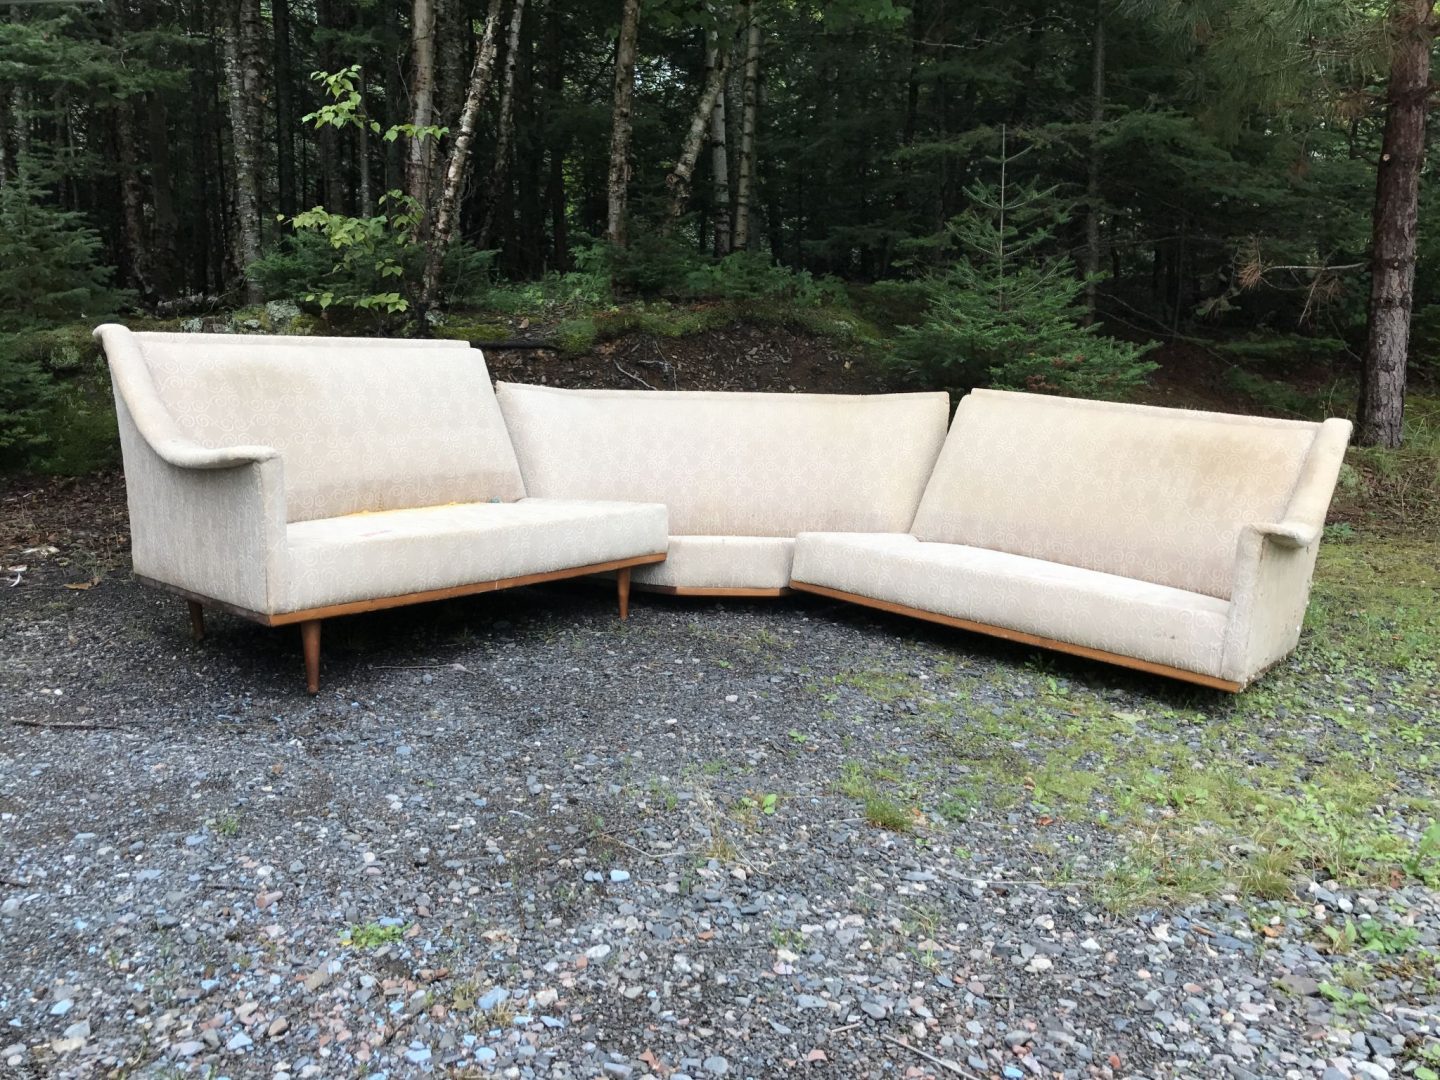 Mid-Century Modern Sectional Sofa Makeover | Before and After